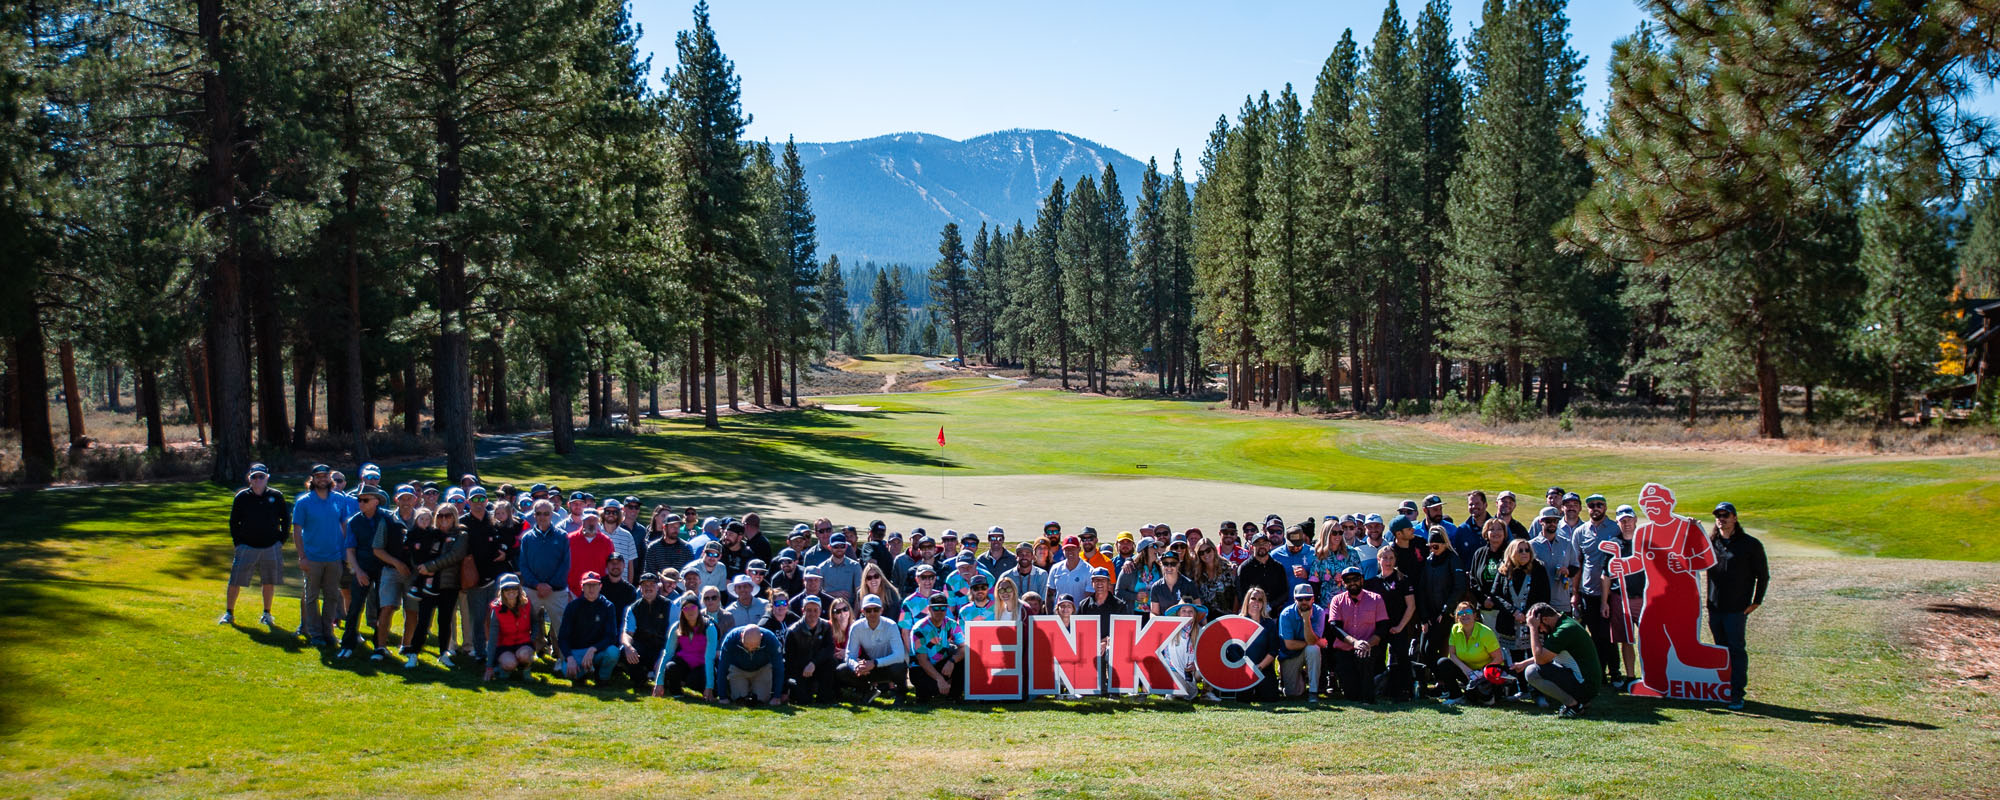 ENKC group on Tahoe Donner Golf Couse